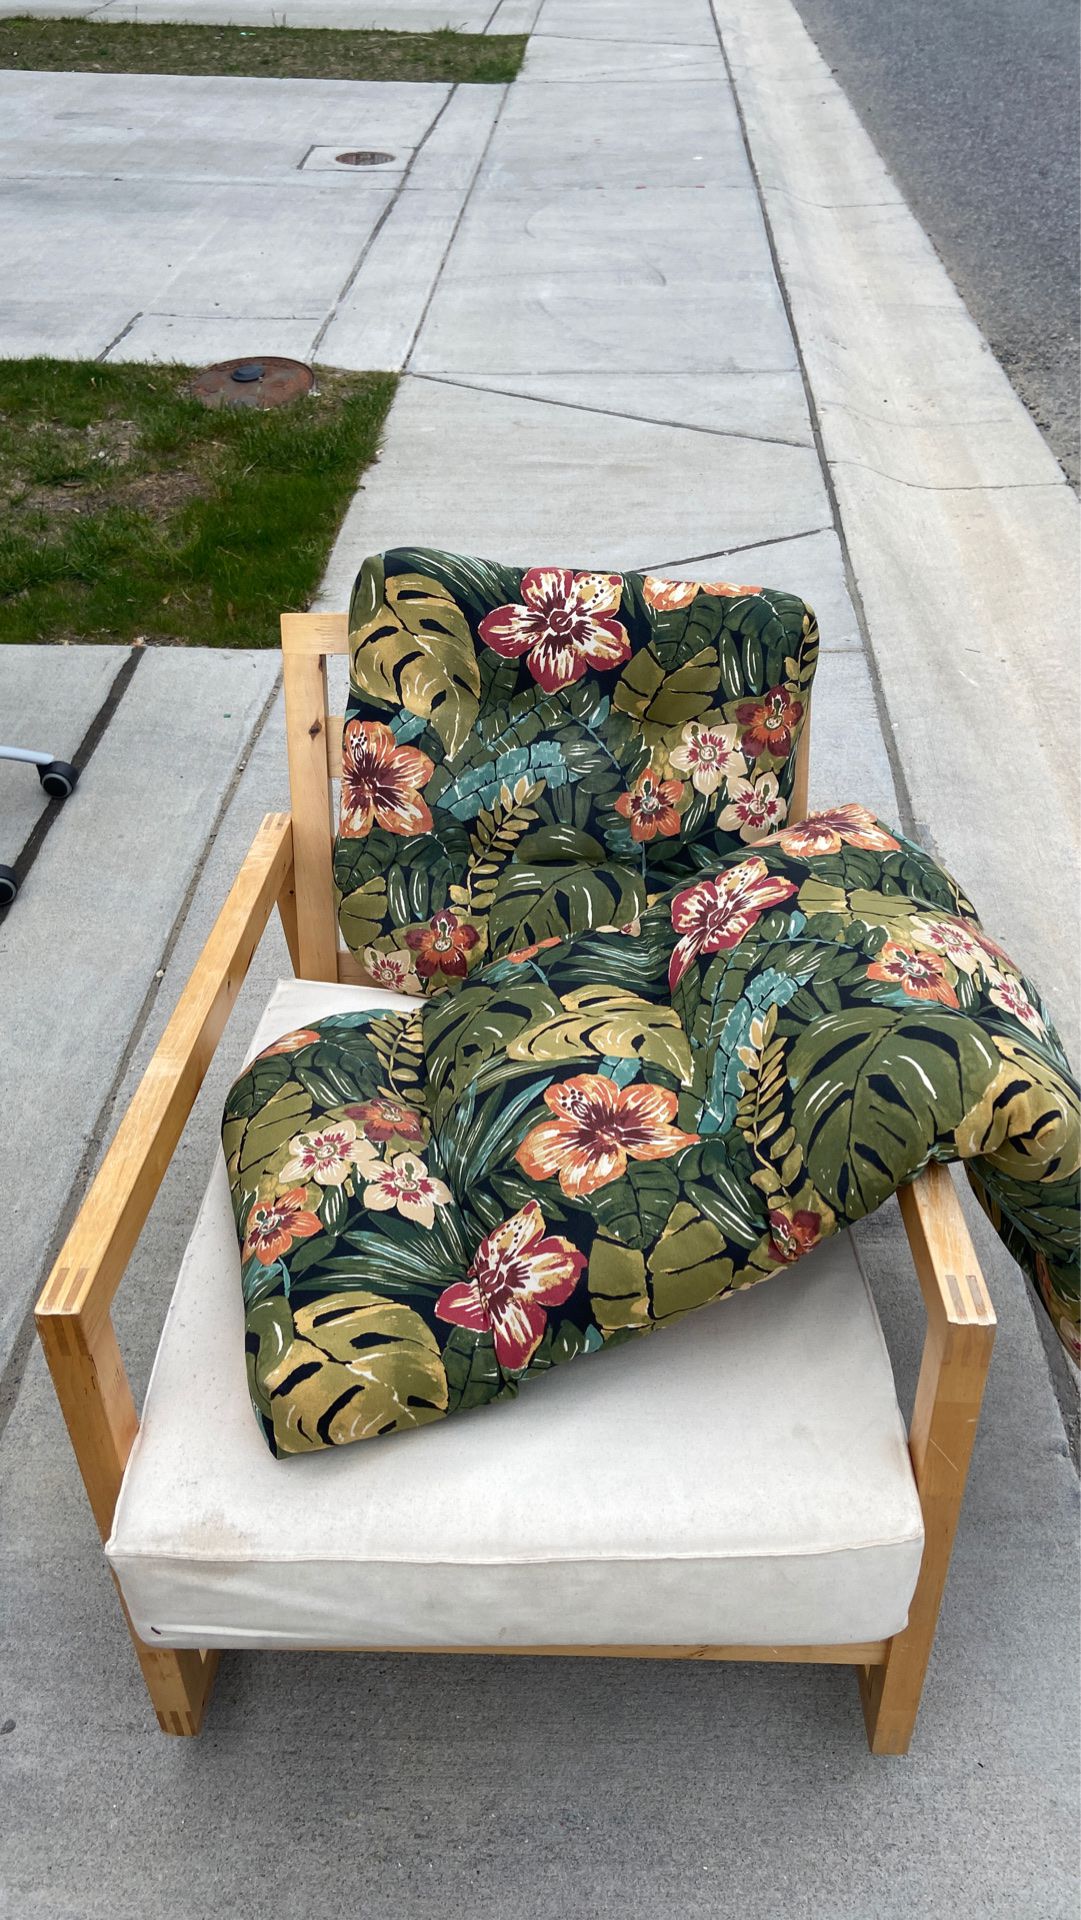 Rocking lounge chair + Extra cushions